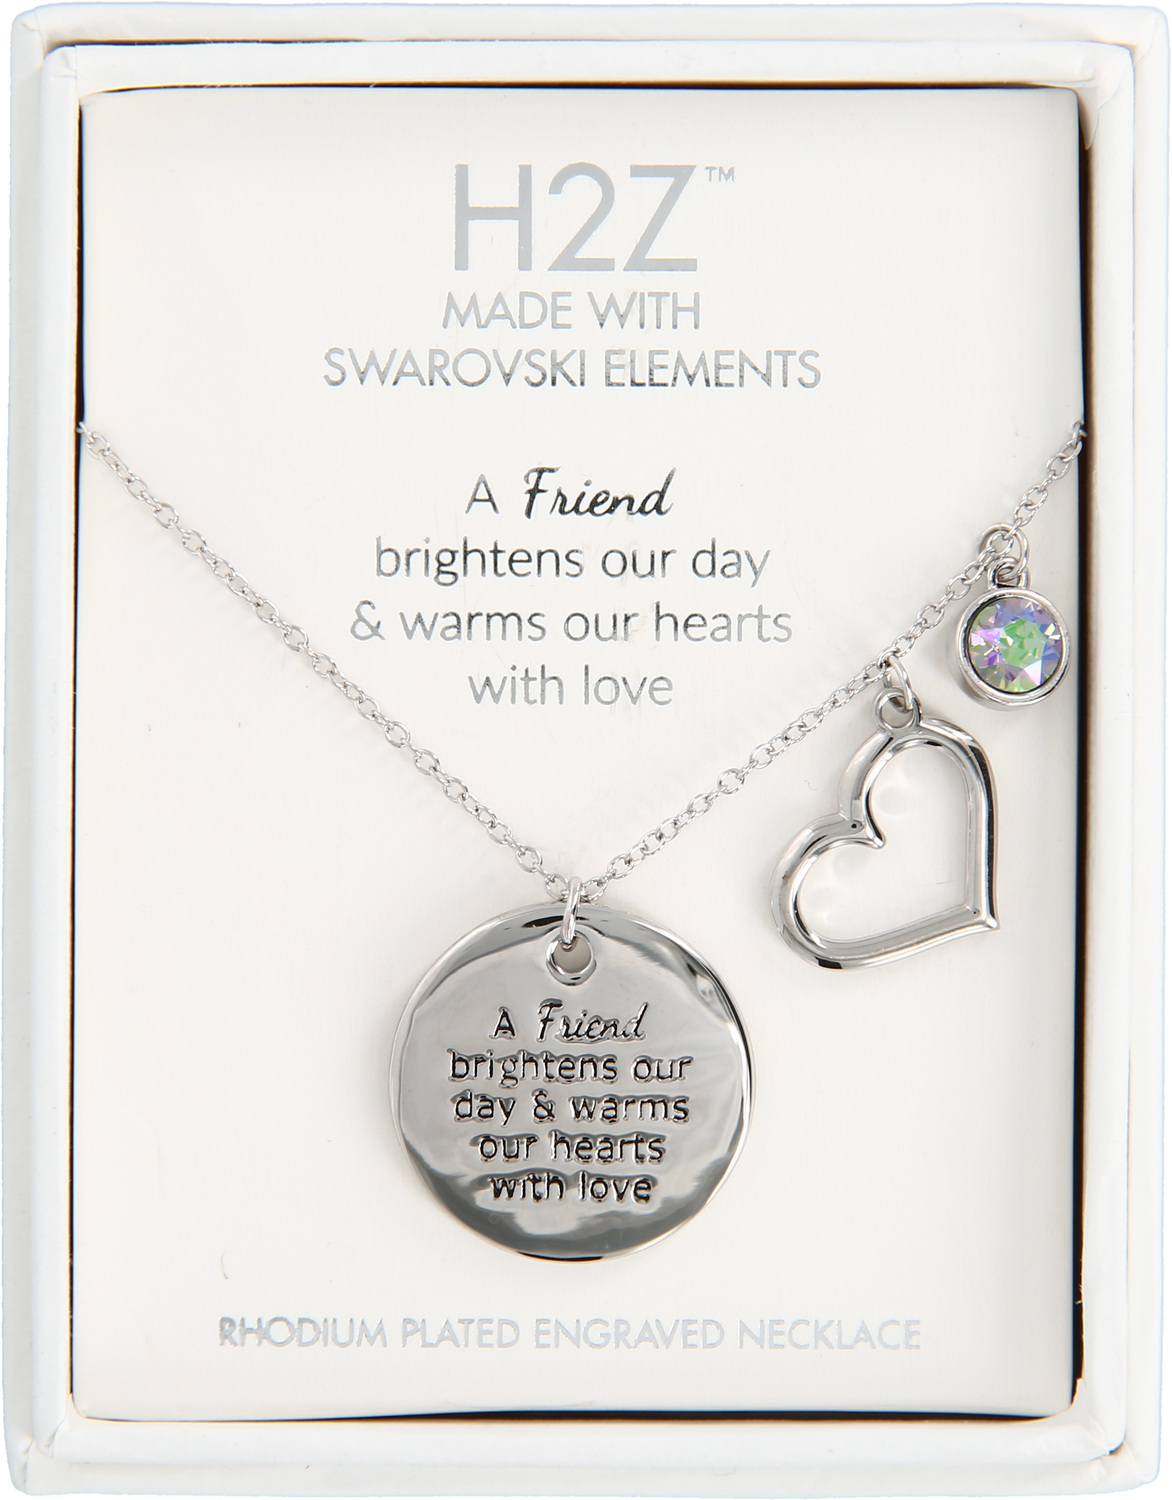 Friend
Vitrail Light Crystal by H2Z Made with Swarovski Elements - Friend
Vitrail Light Crystal - 16.5"-20.5" Engraved Rhodium Plated Austrian Element Necklace